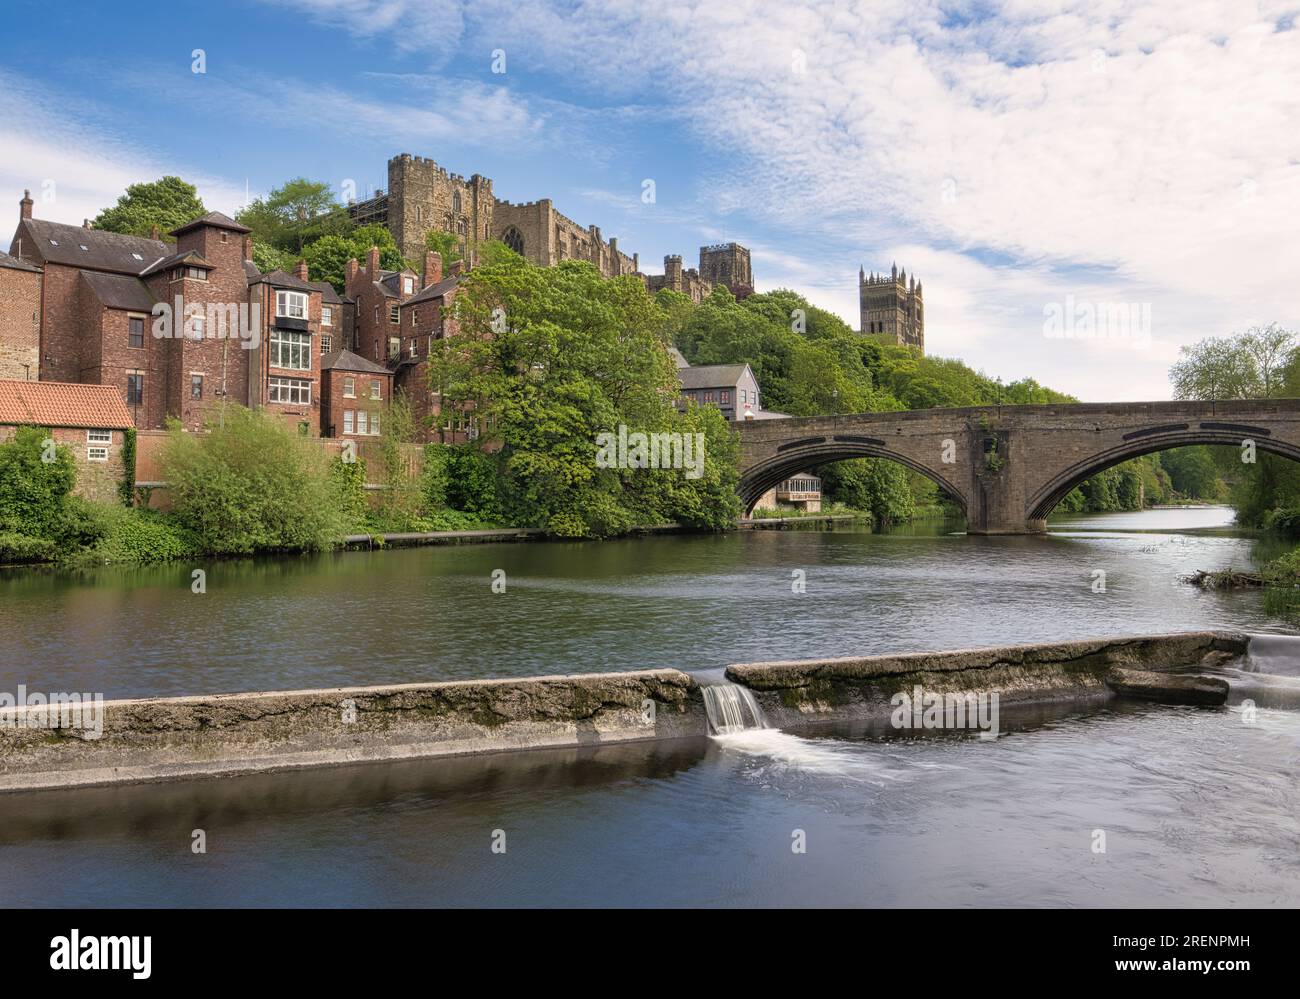 Looking across the River Wear in Durham towards Framwellgate Bridge, Durham Castle and the Cathedral. Stock Photo